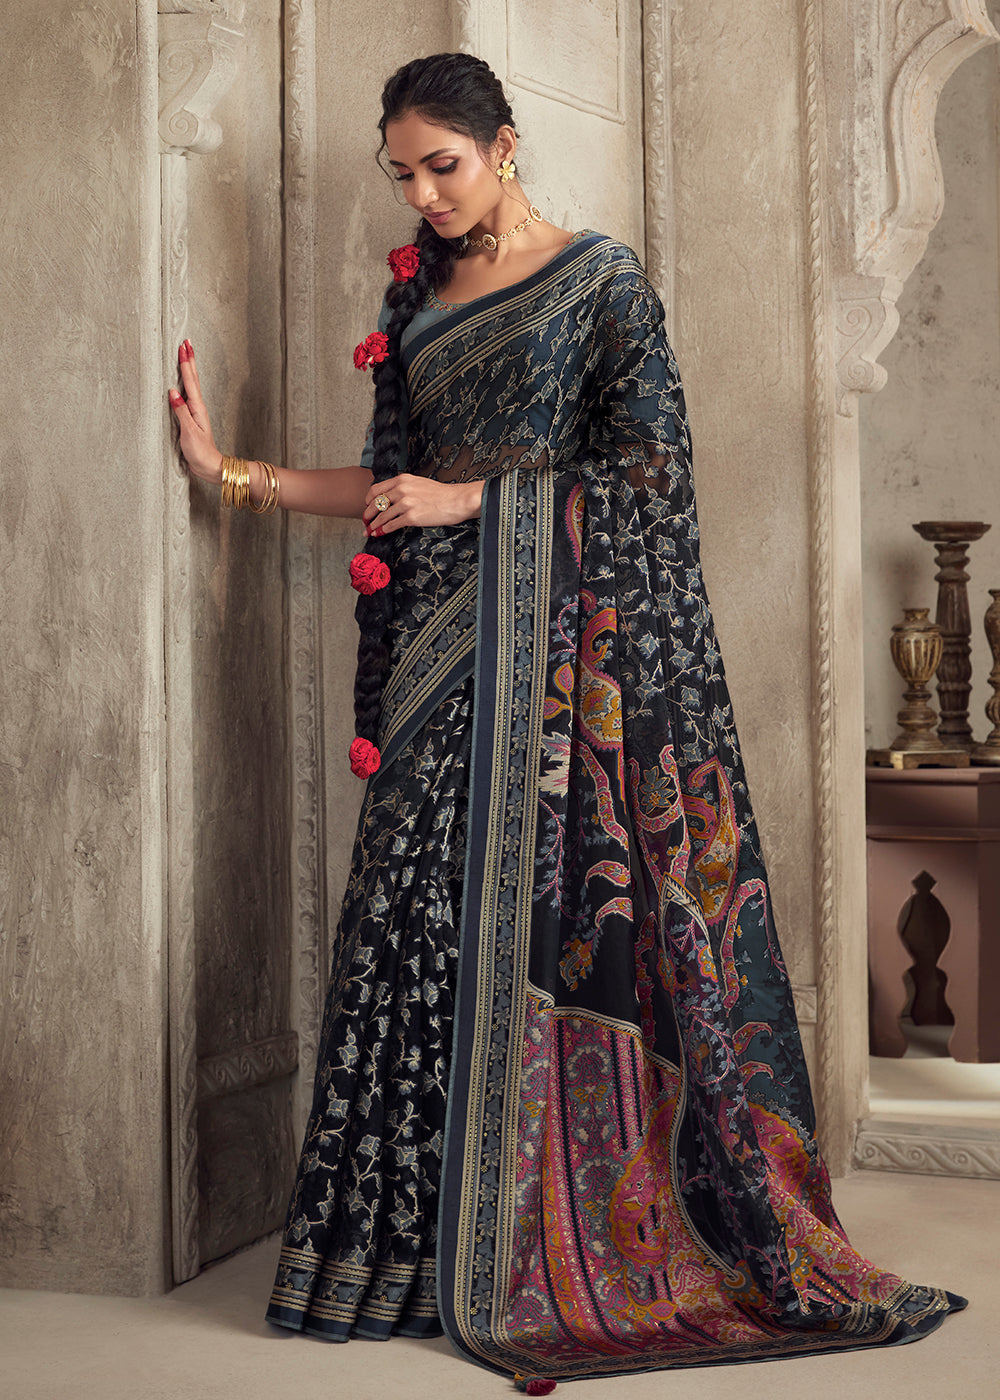 Buy Now Navy Blue Soft Organza Brasso Embroidered Wedding Festive Saree Online in USA, UK, Canada & Worldwide at Empress Clothing.